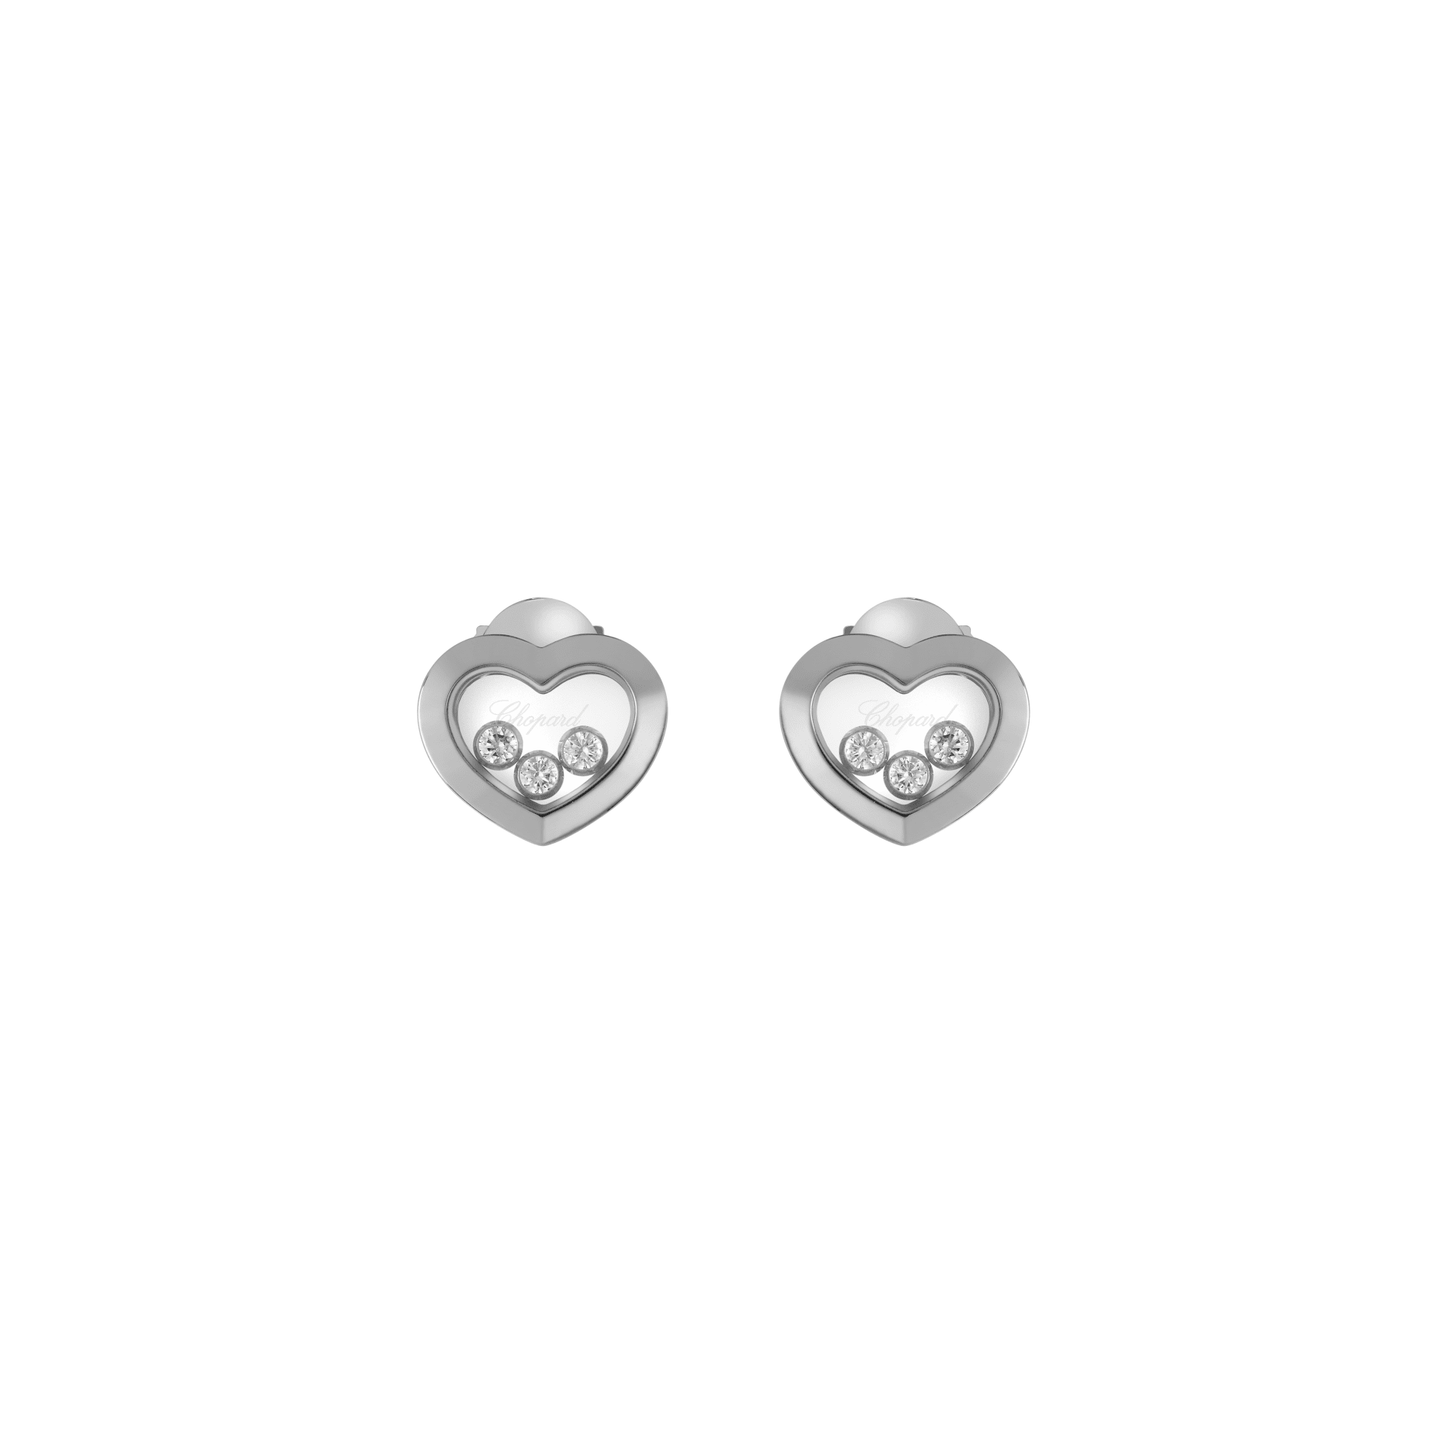 HAPPY DIAMONDS ICONS EARRINGS, ETHICAL WHITE GOLD, DIAMONDS 83A611-1001